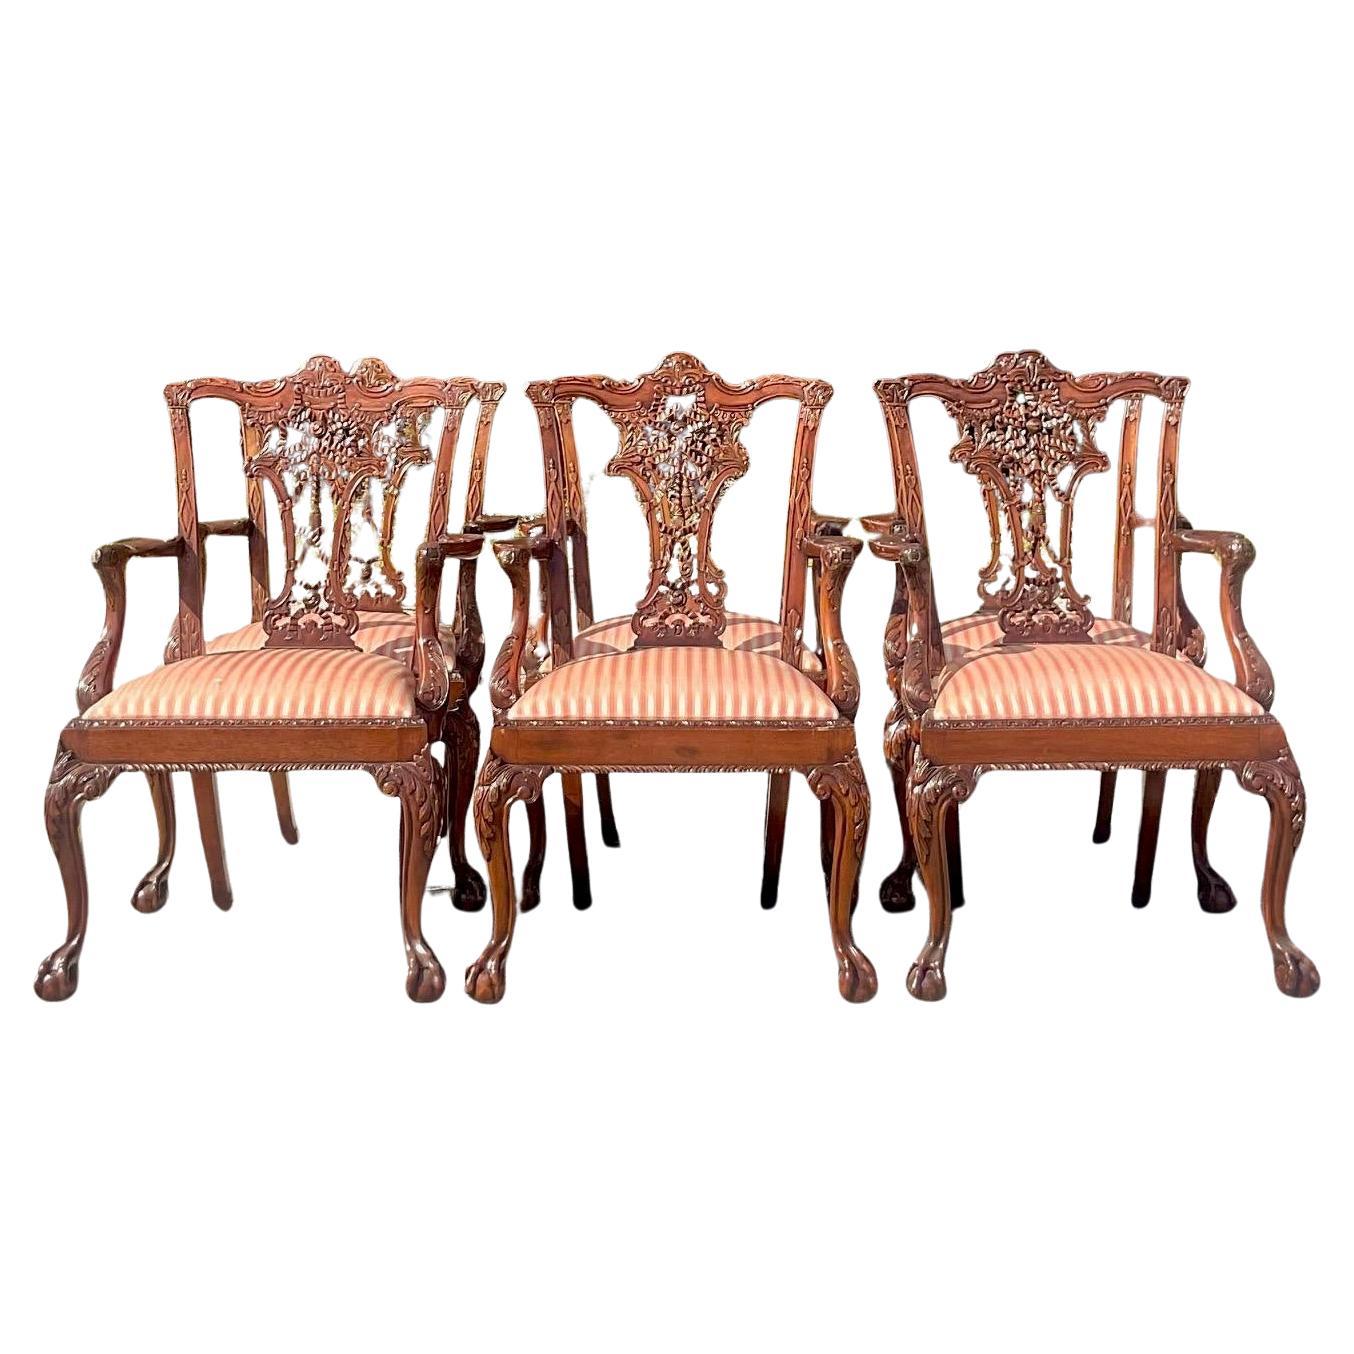 Vintage Regency Carved Chippendale Dining Chairs - Set of Six